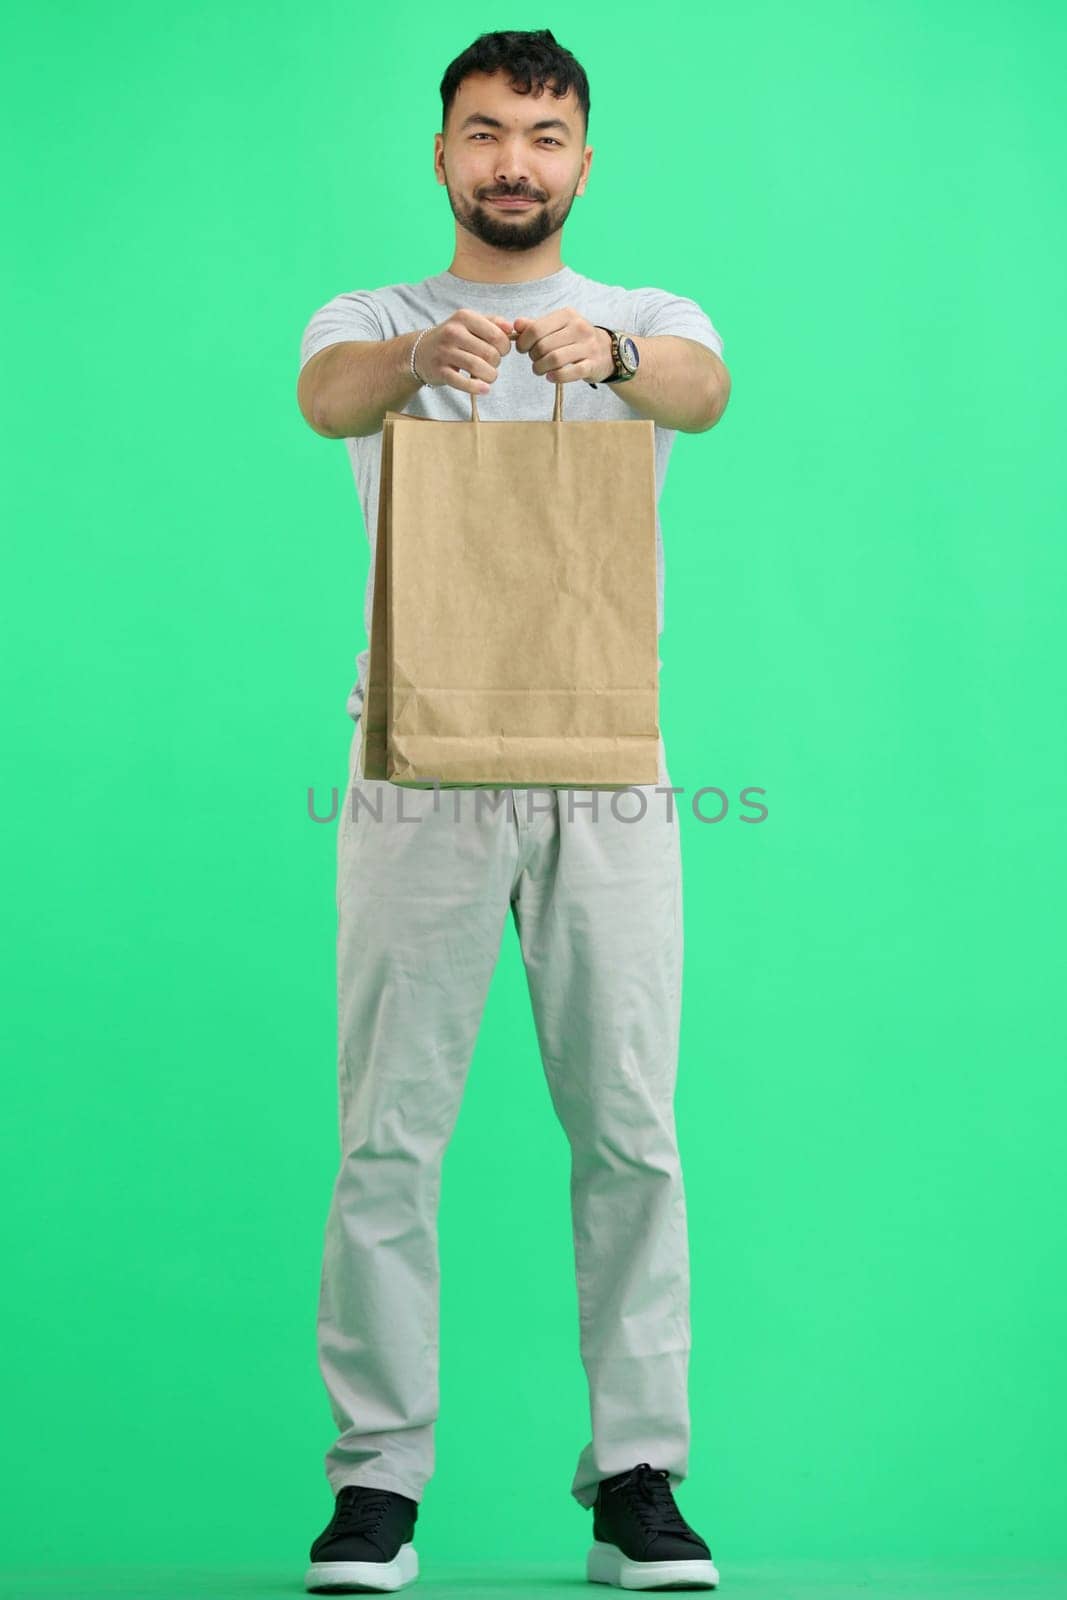 A man, full-length, on a green background, with bags.